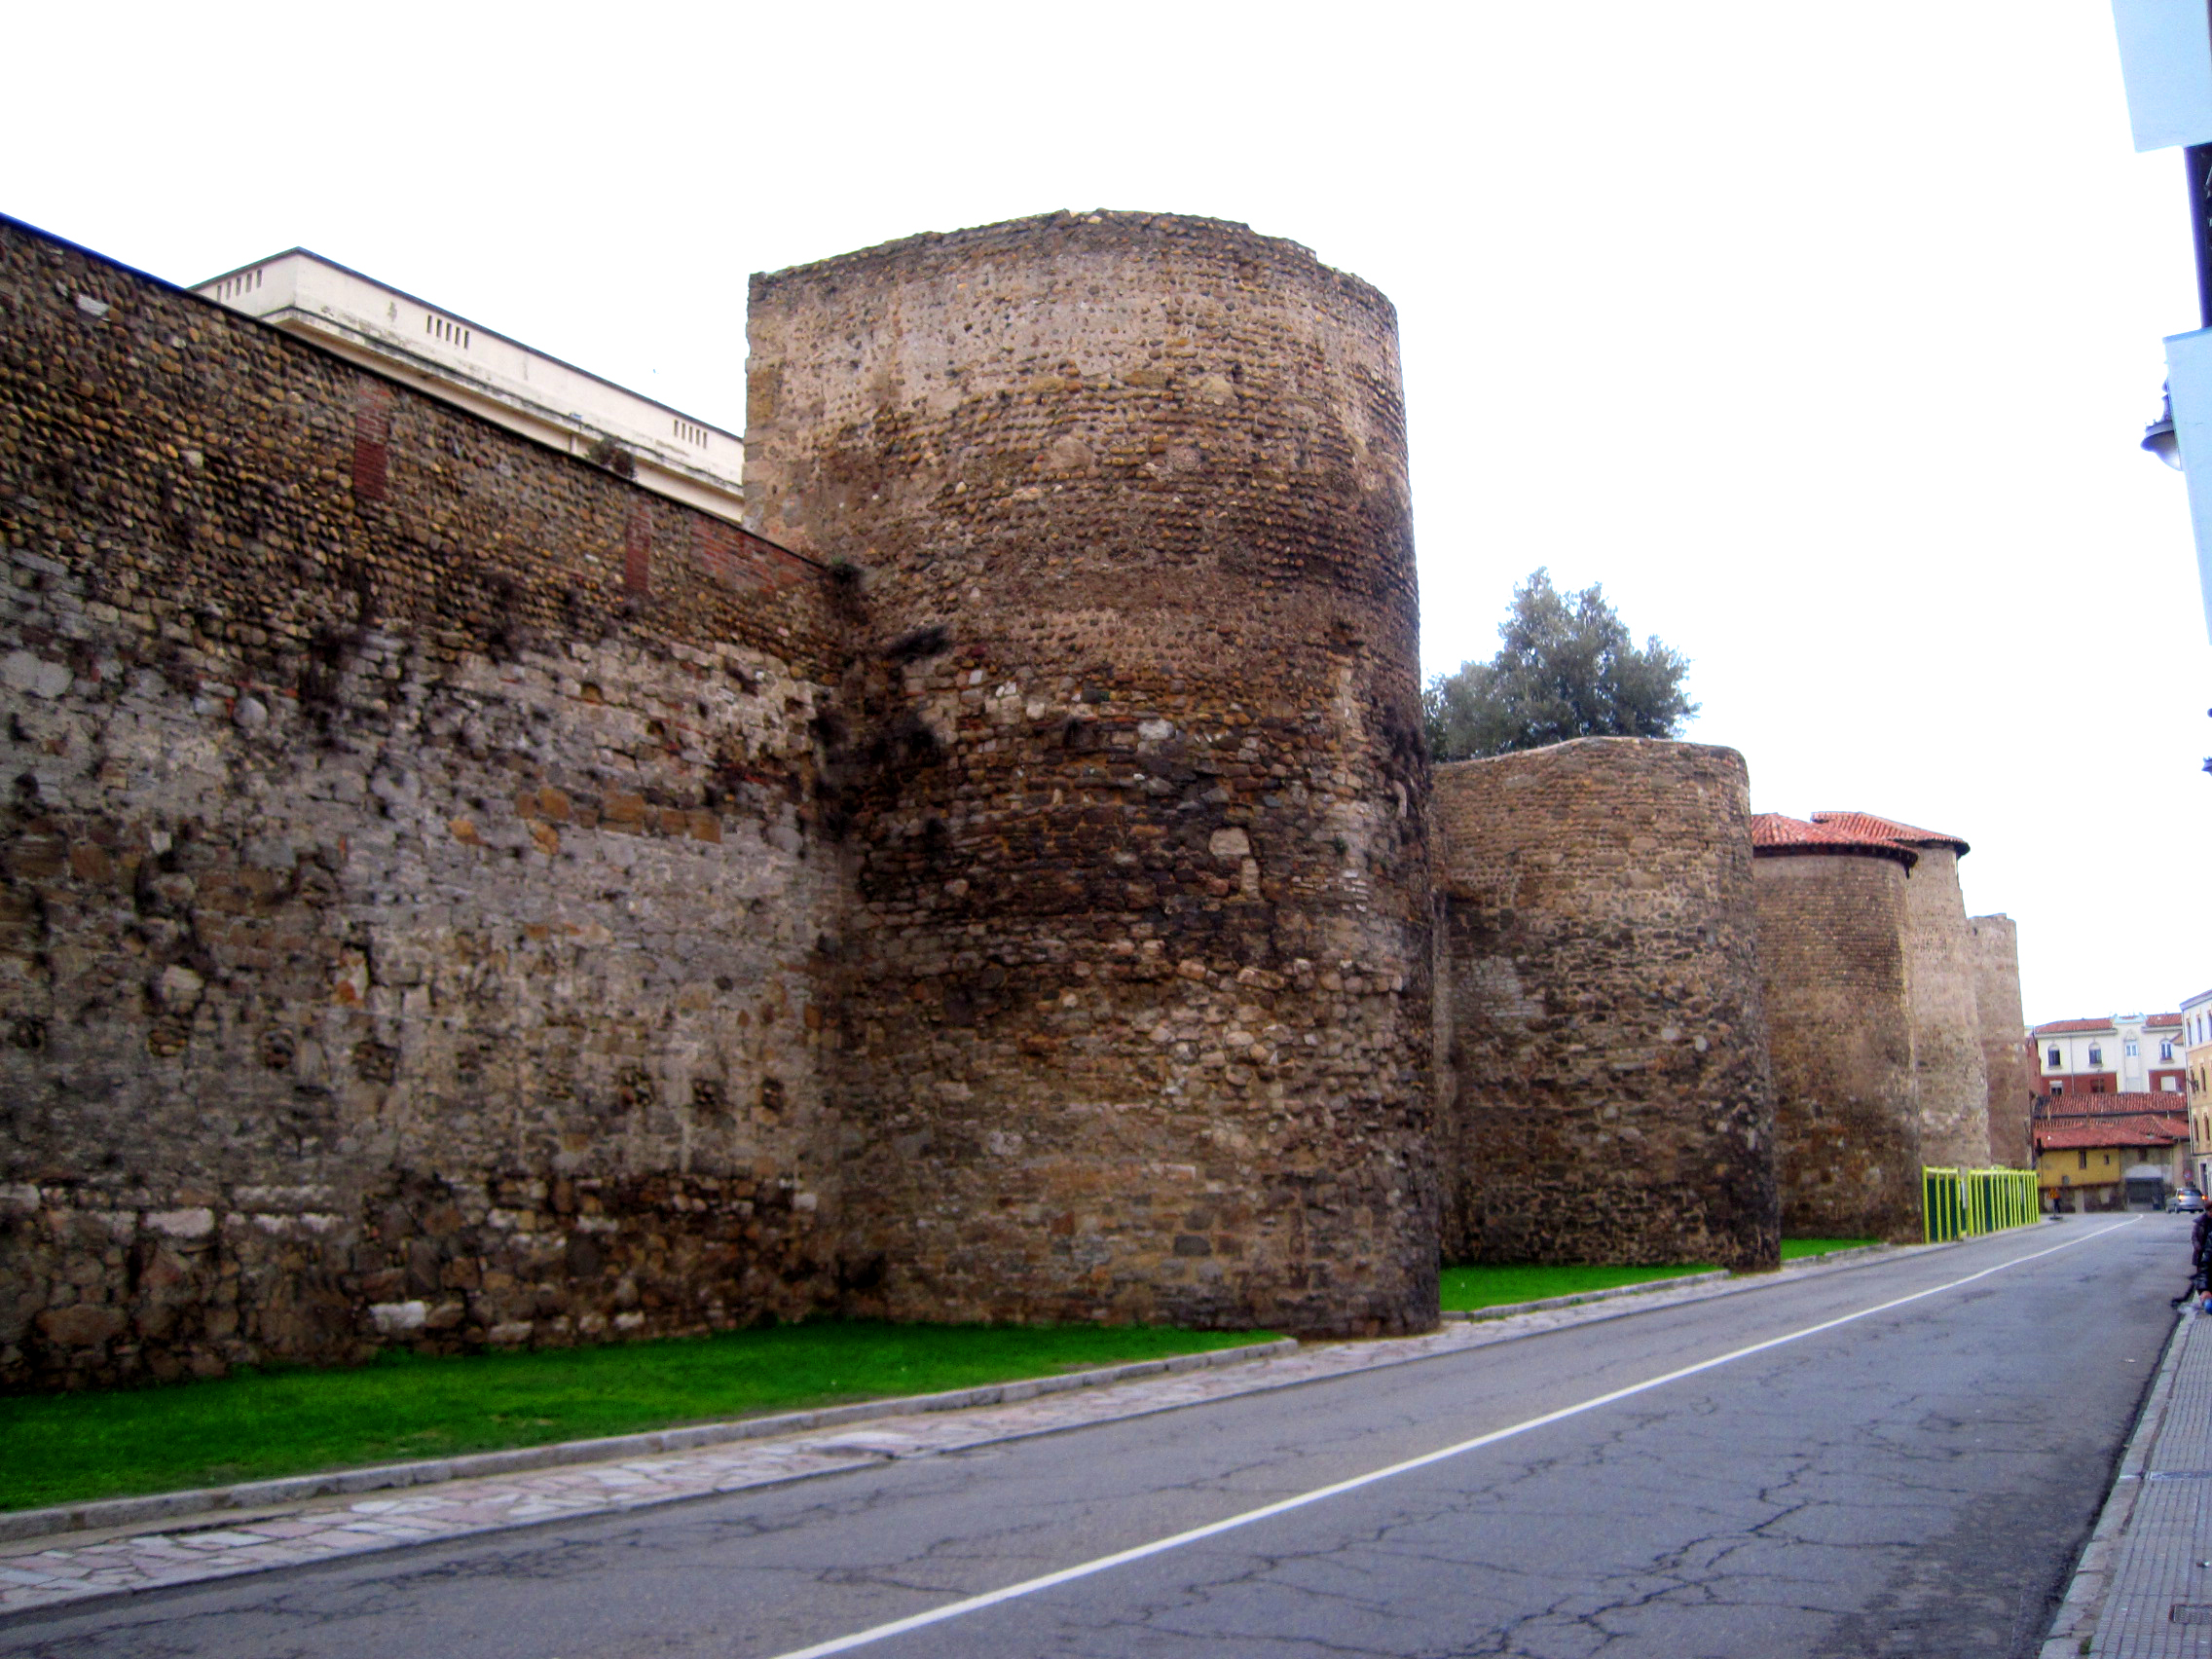 León Walls made of stone